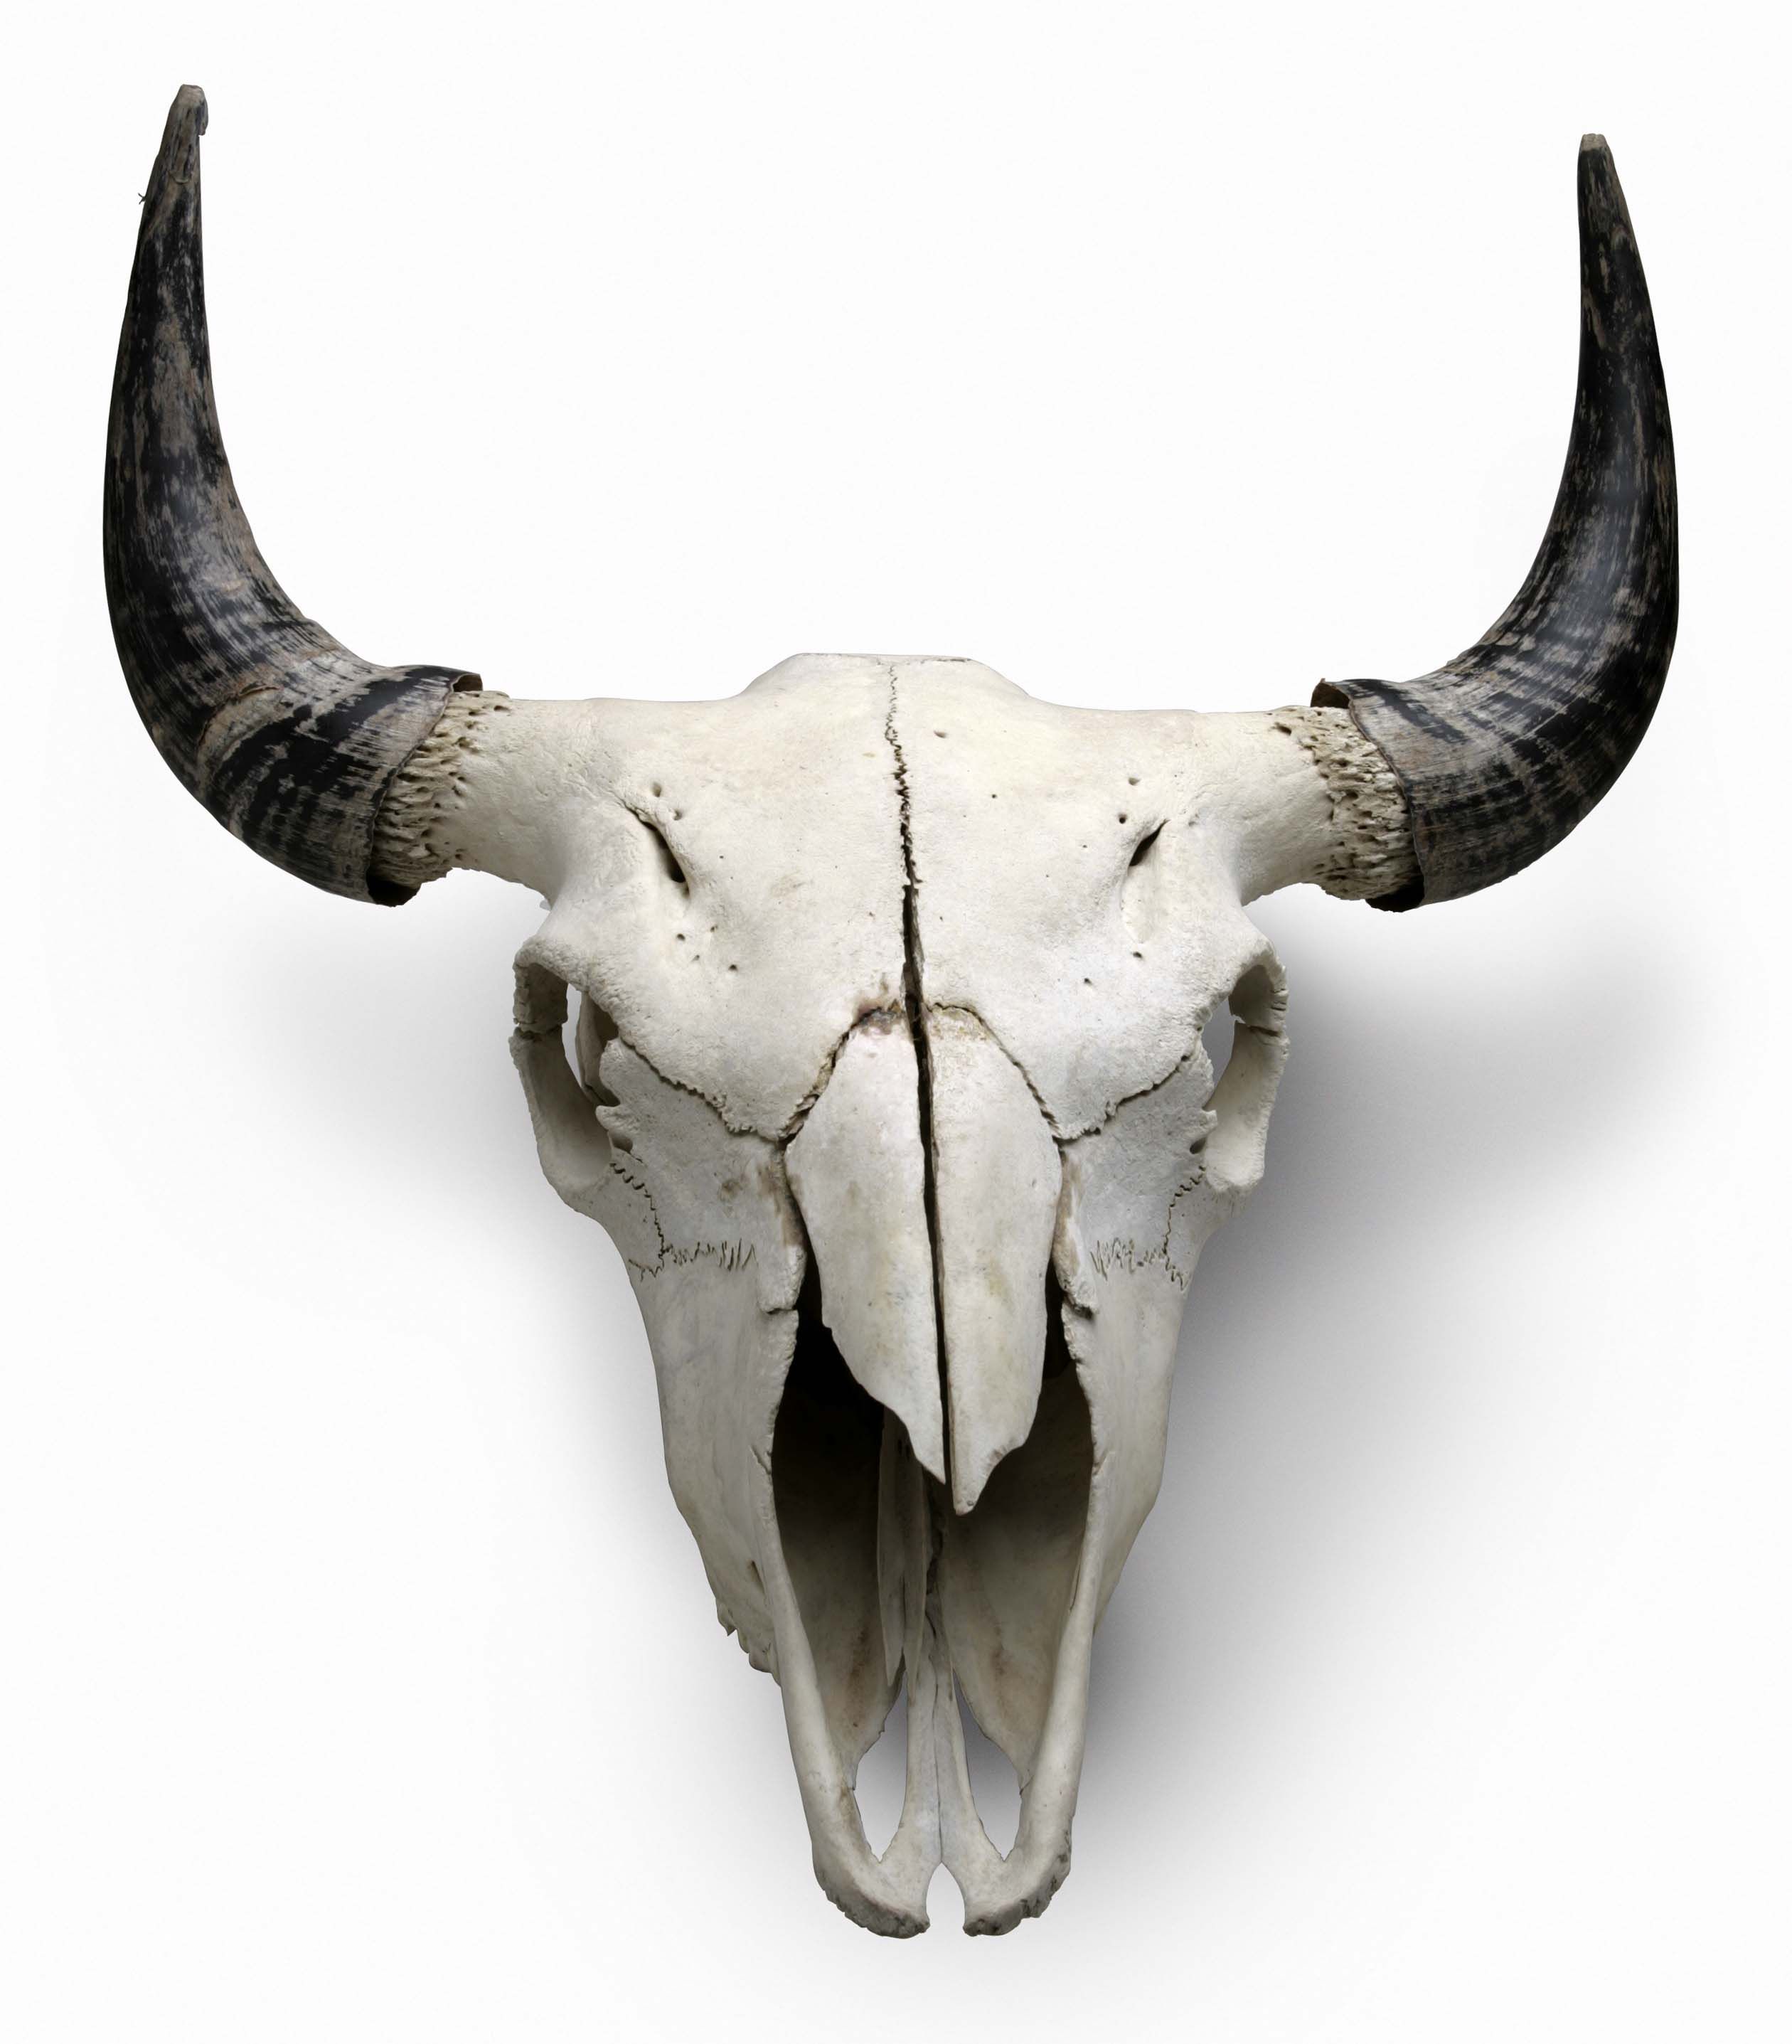 Inspiration, Skull: The form and shapes that make up these animal ...